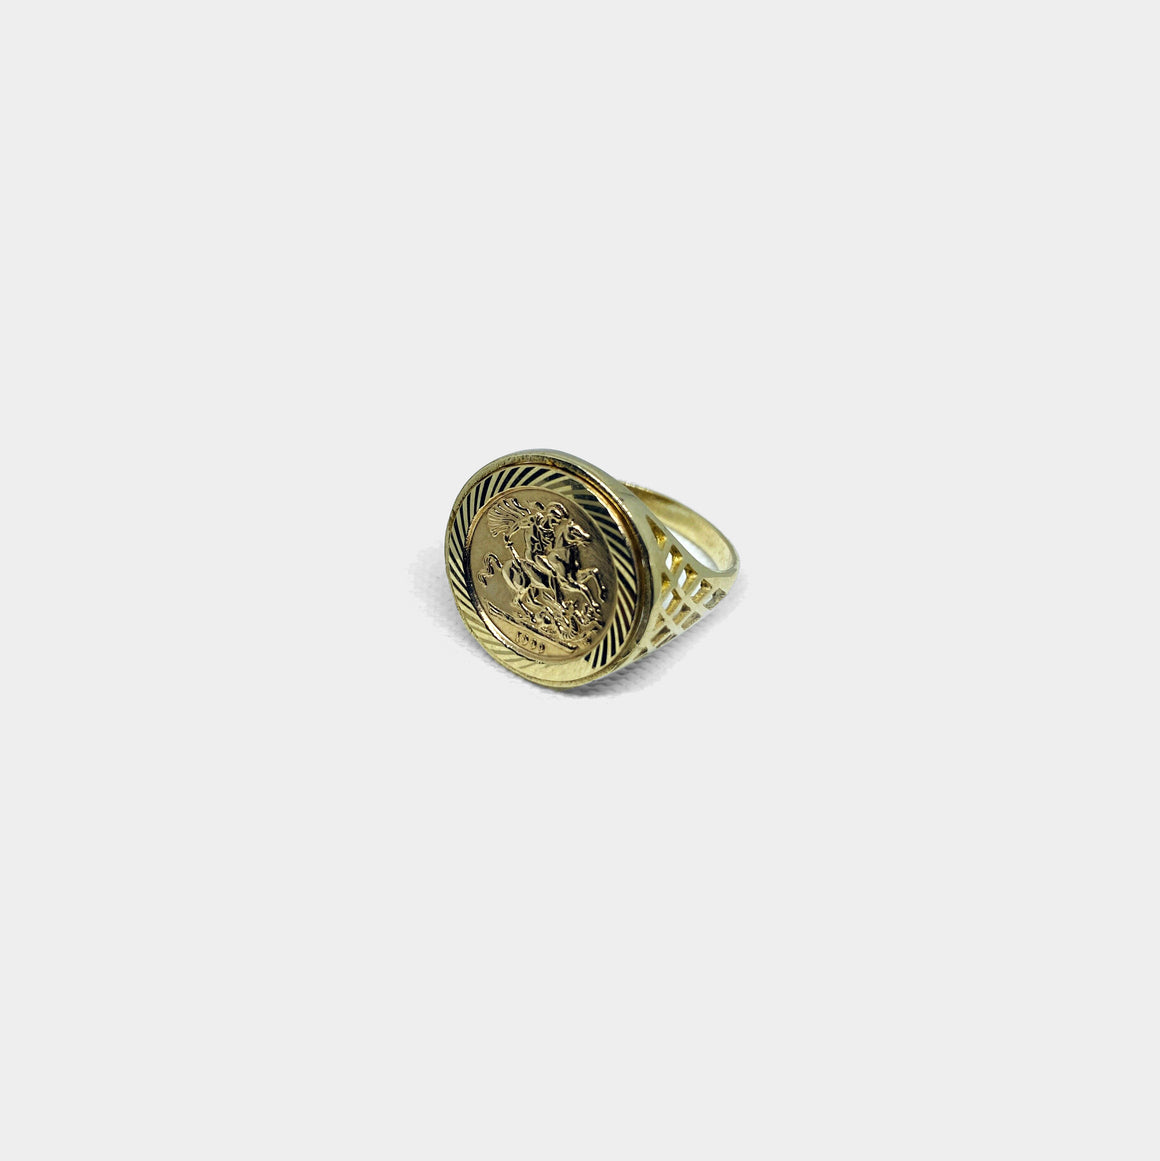 54 FLORAL 9ct GOLD 375 SAINT GEORGE FACE SOVEREIGN SIGNET RING